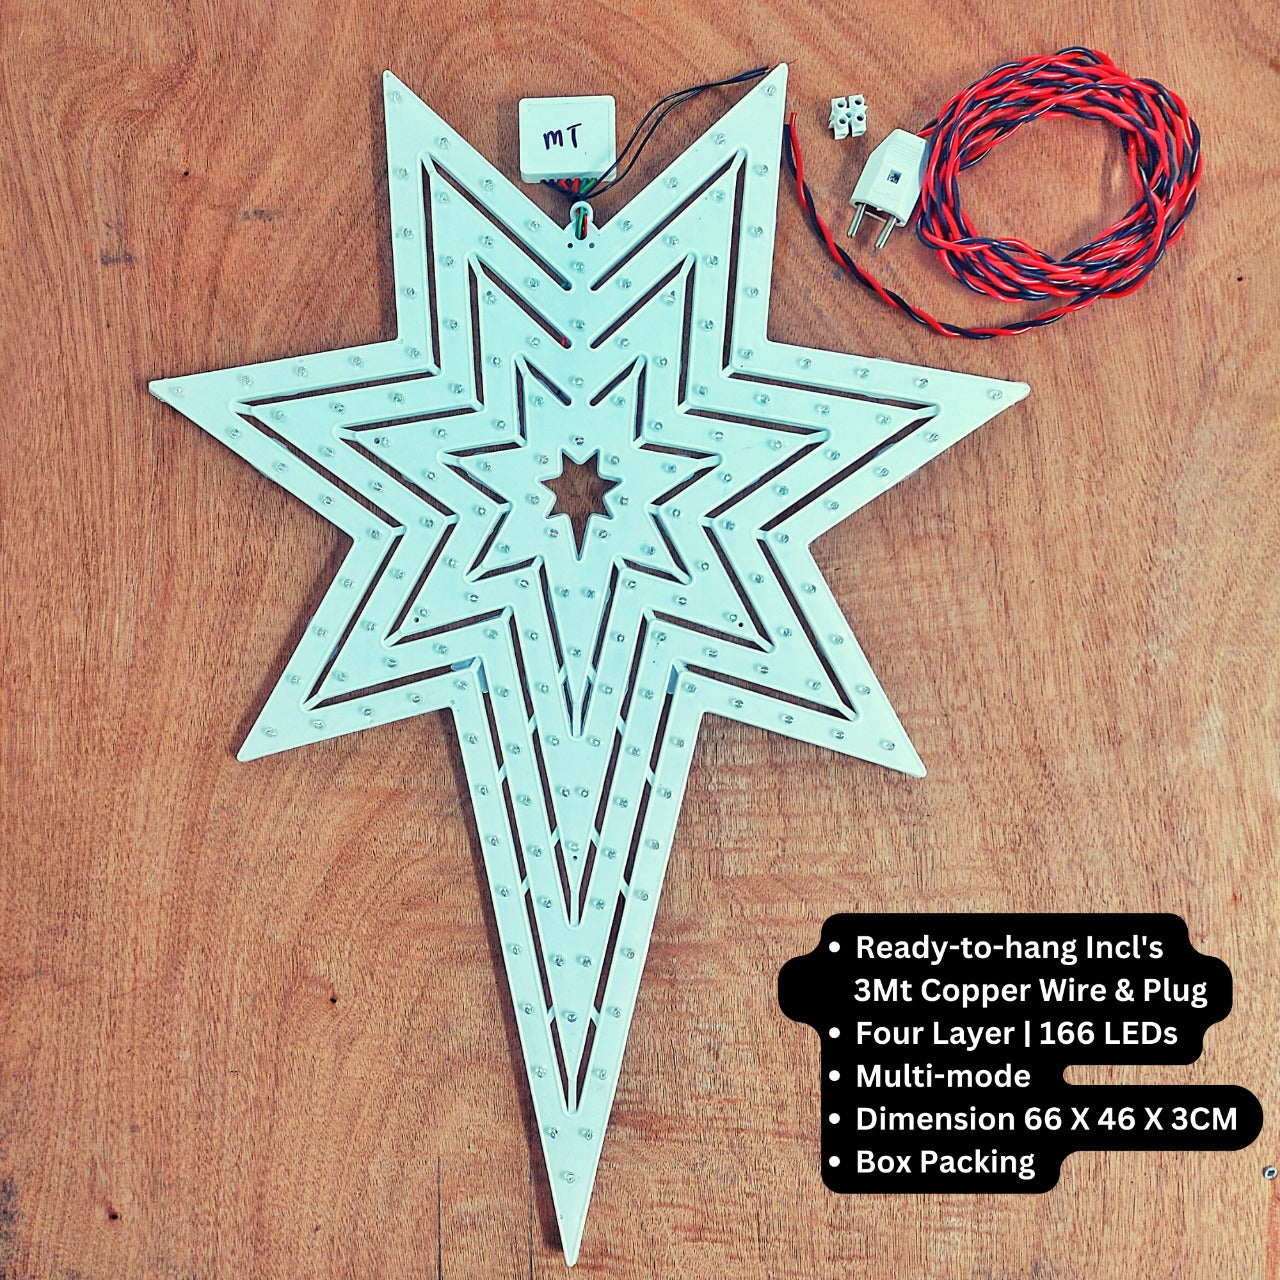 Large-sized 4 Layer RED LED Star